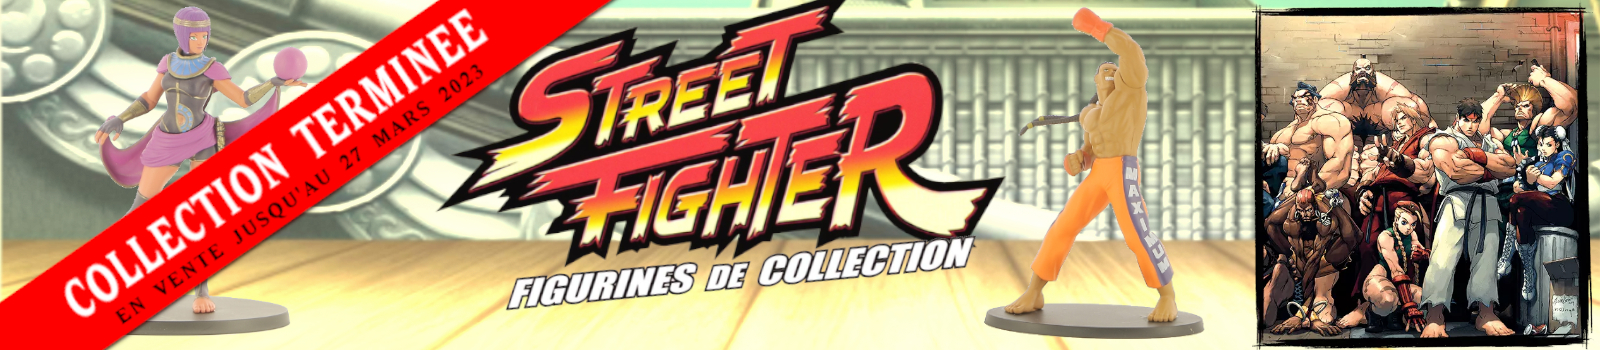 Collection terminée - Street Fighter